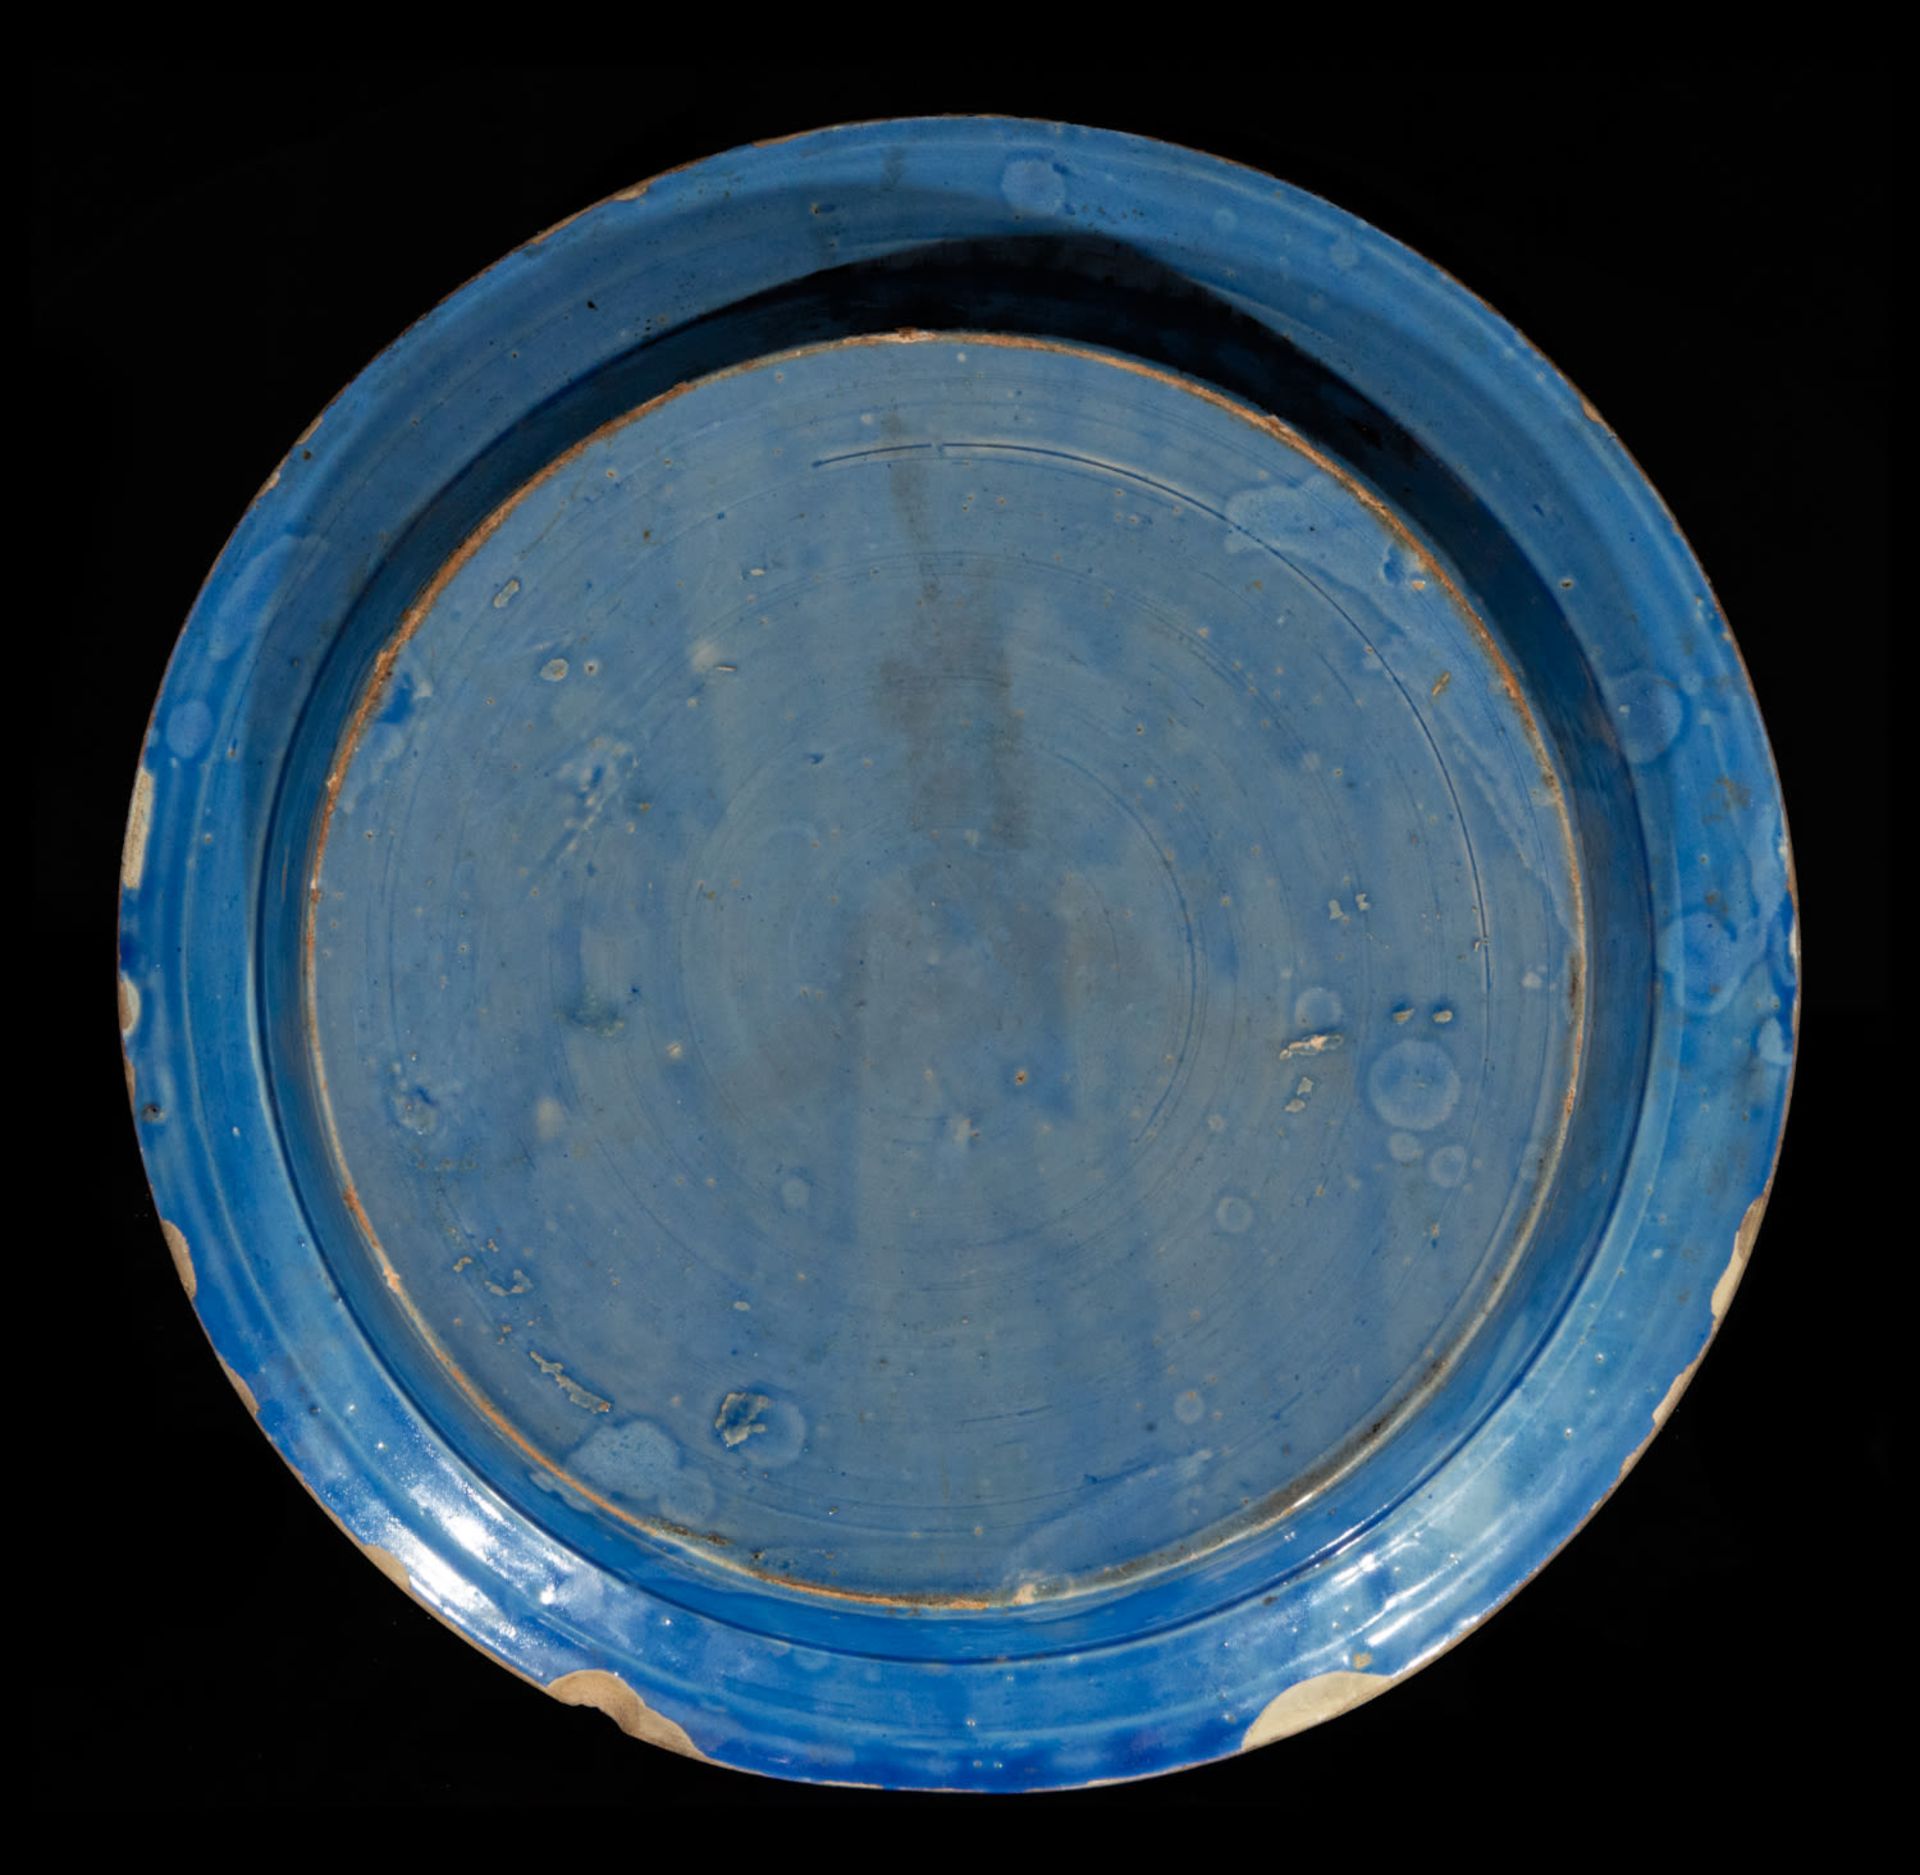 Spectacular Large Plate in enameled blue from Manises with Lion rampant from the 16th century - Image 4 of 4